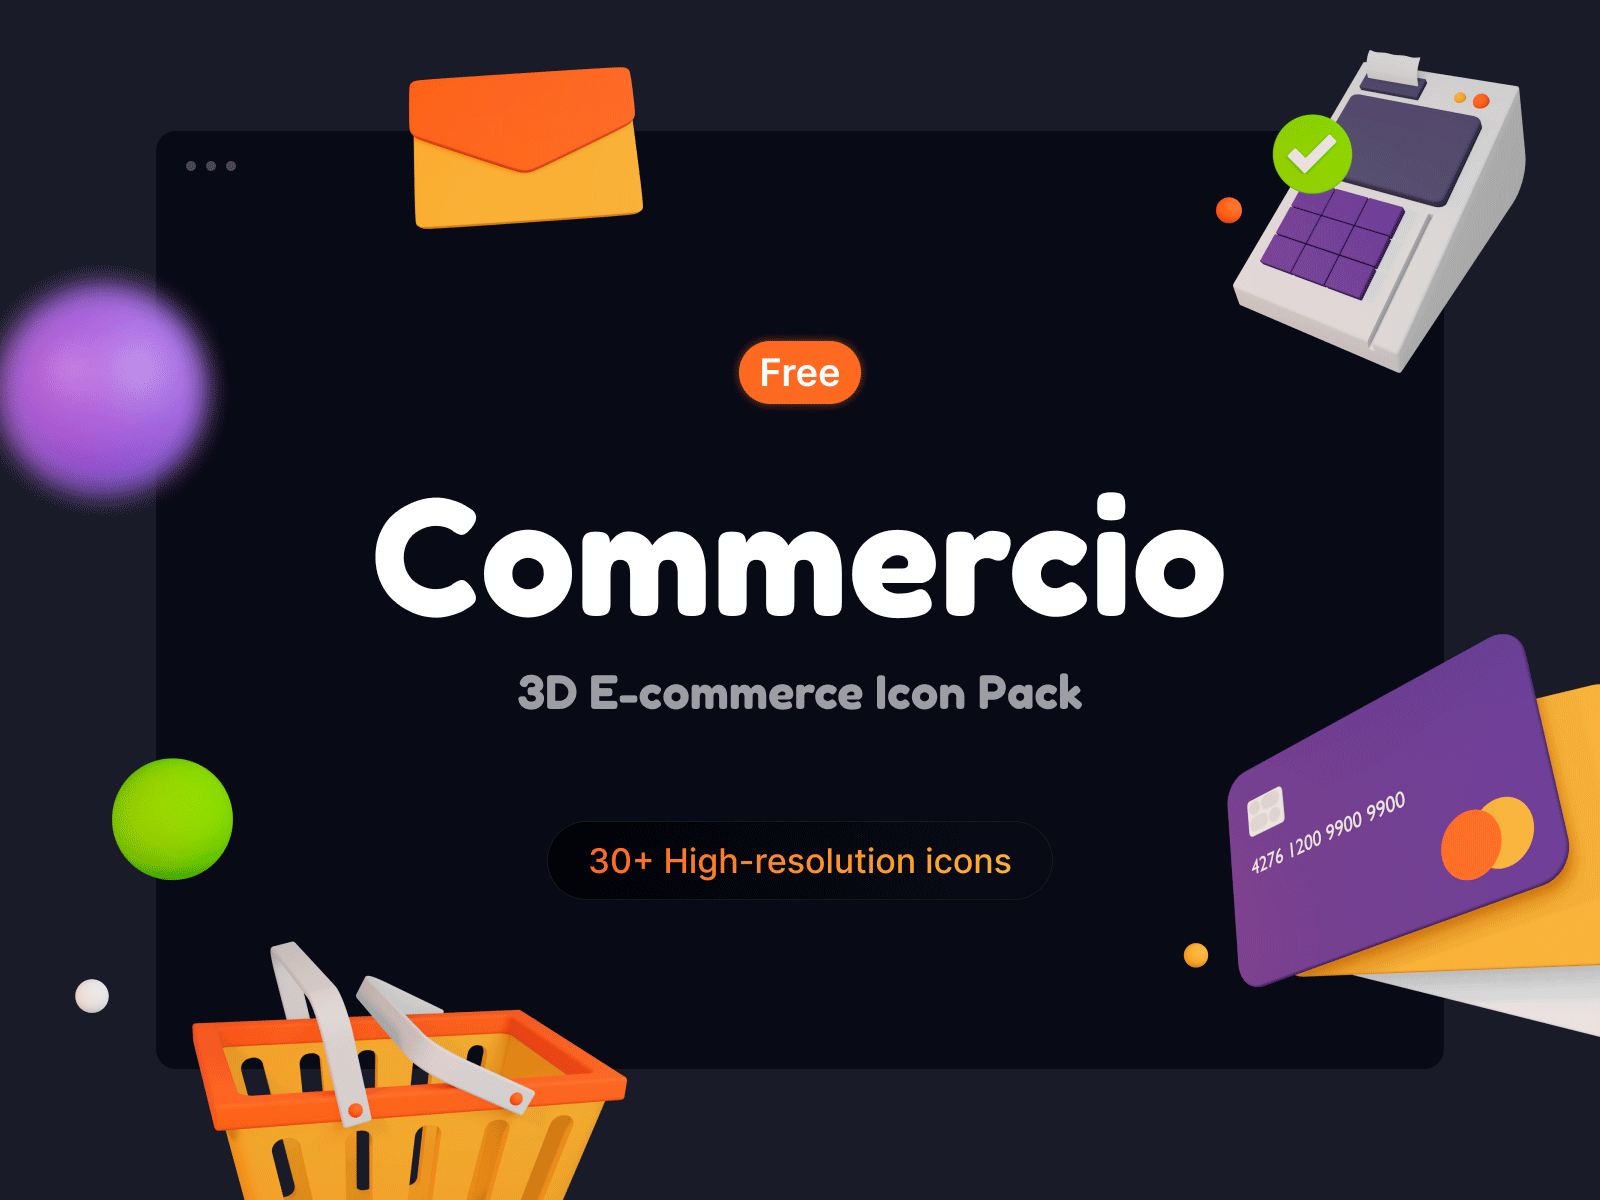 Commercio: Free 3D E-commerce Icon Pack 3d business buy cards cargo cart coins discount e commerce free icons illustration money payment sale service shippinh shop